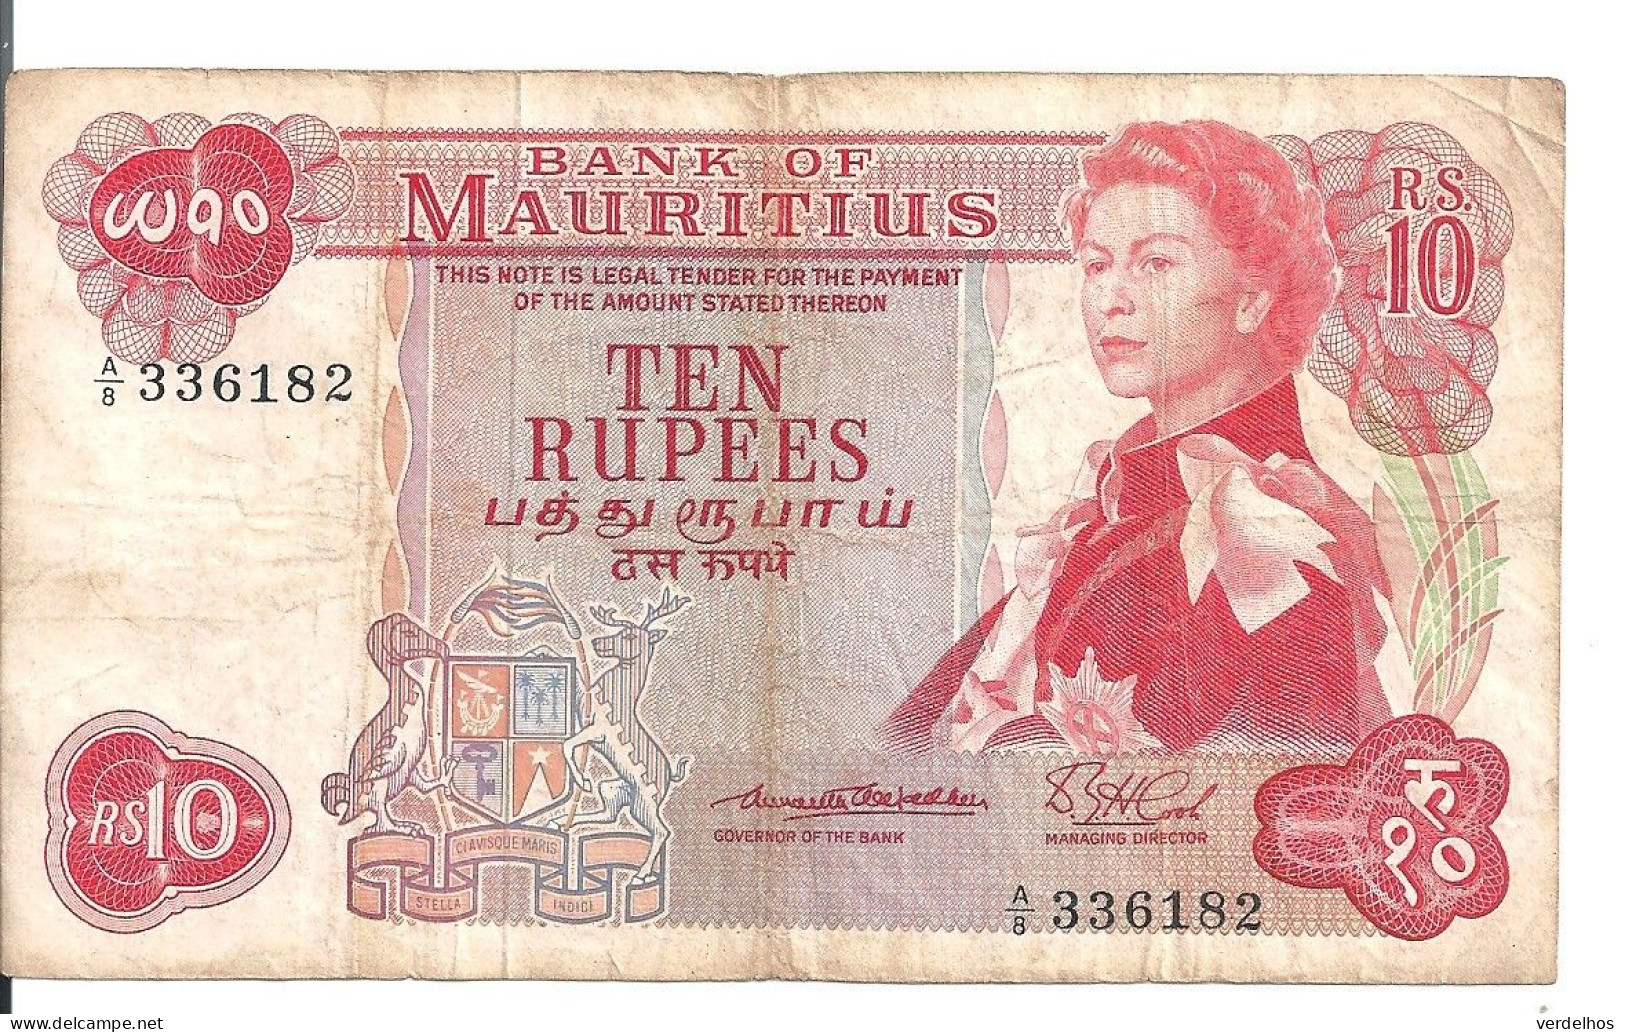 MAURICE 10 RUPEES ND1967 VF P 31 A - Maurice